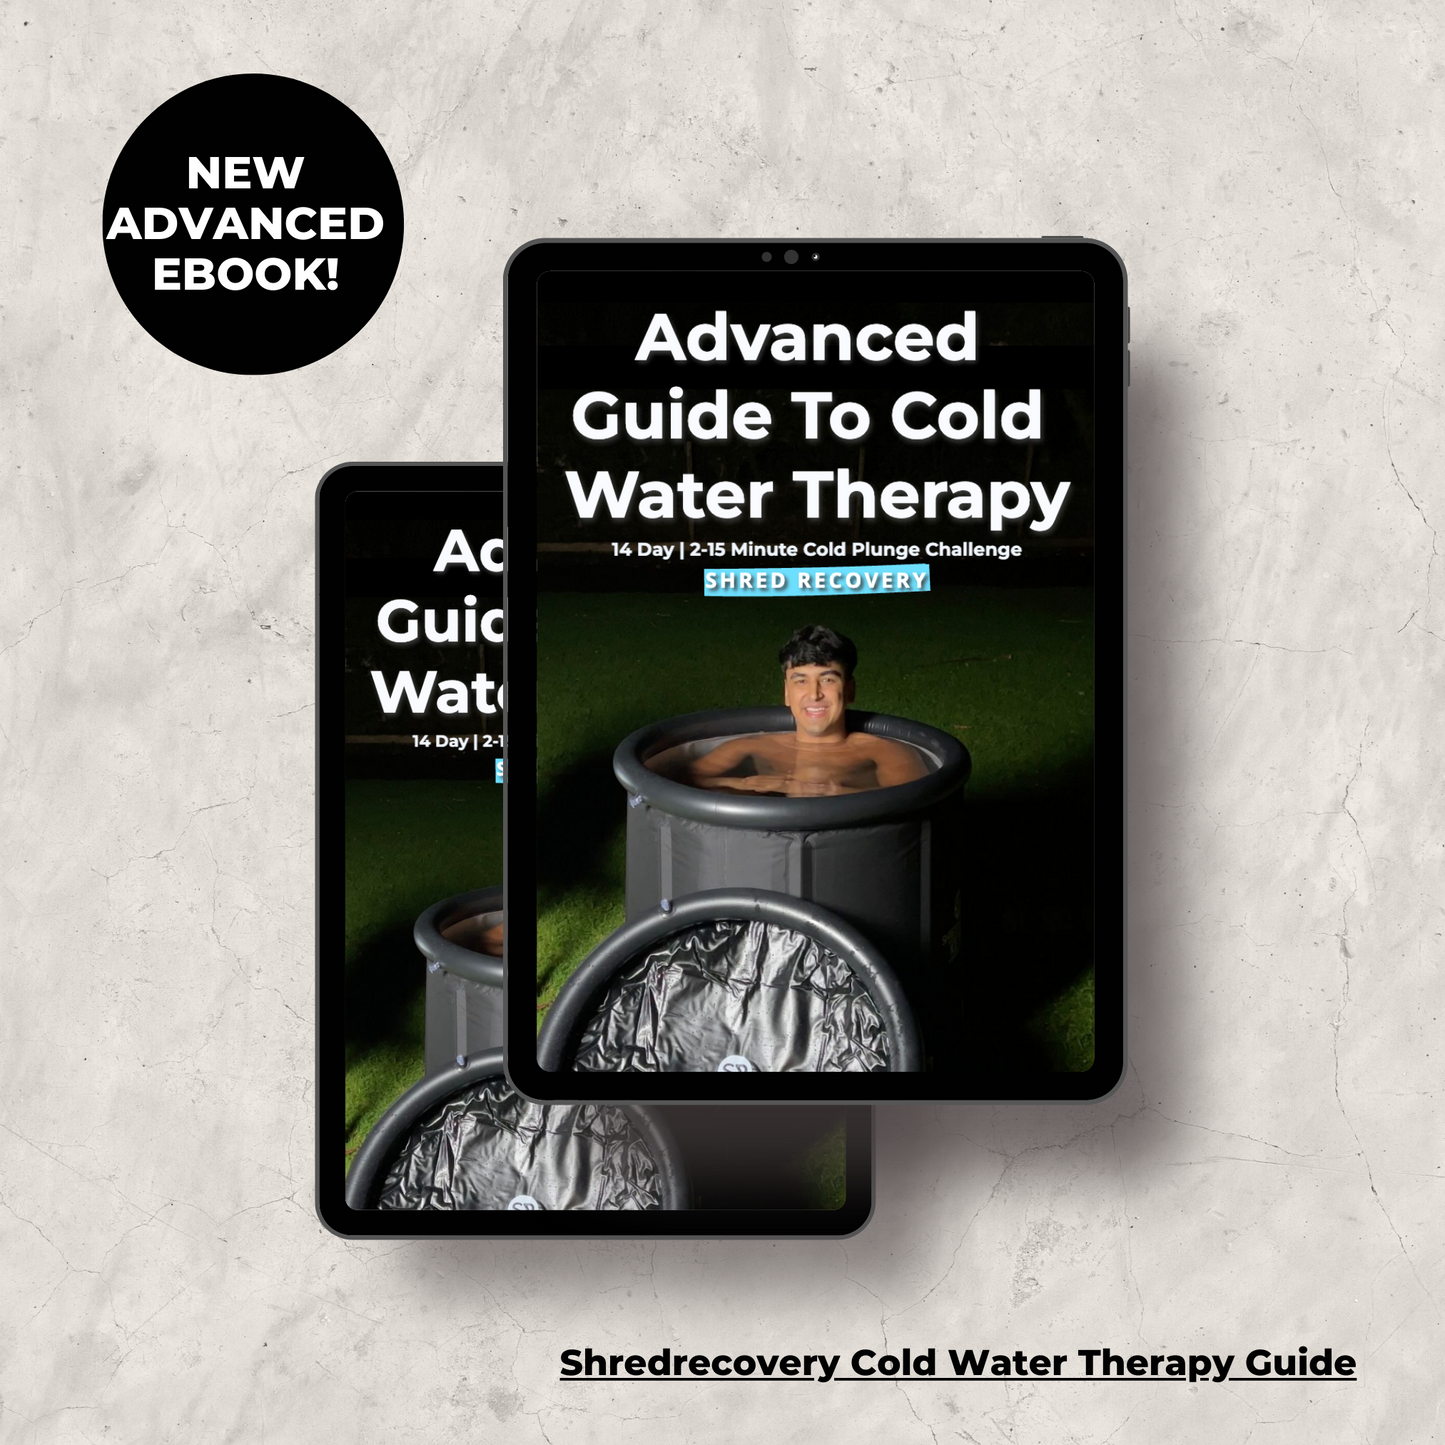 Advanced Guide To Cold Water Therapy